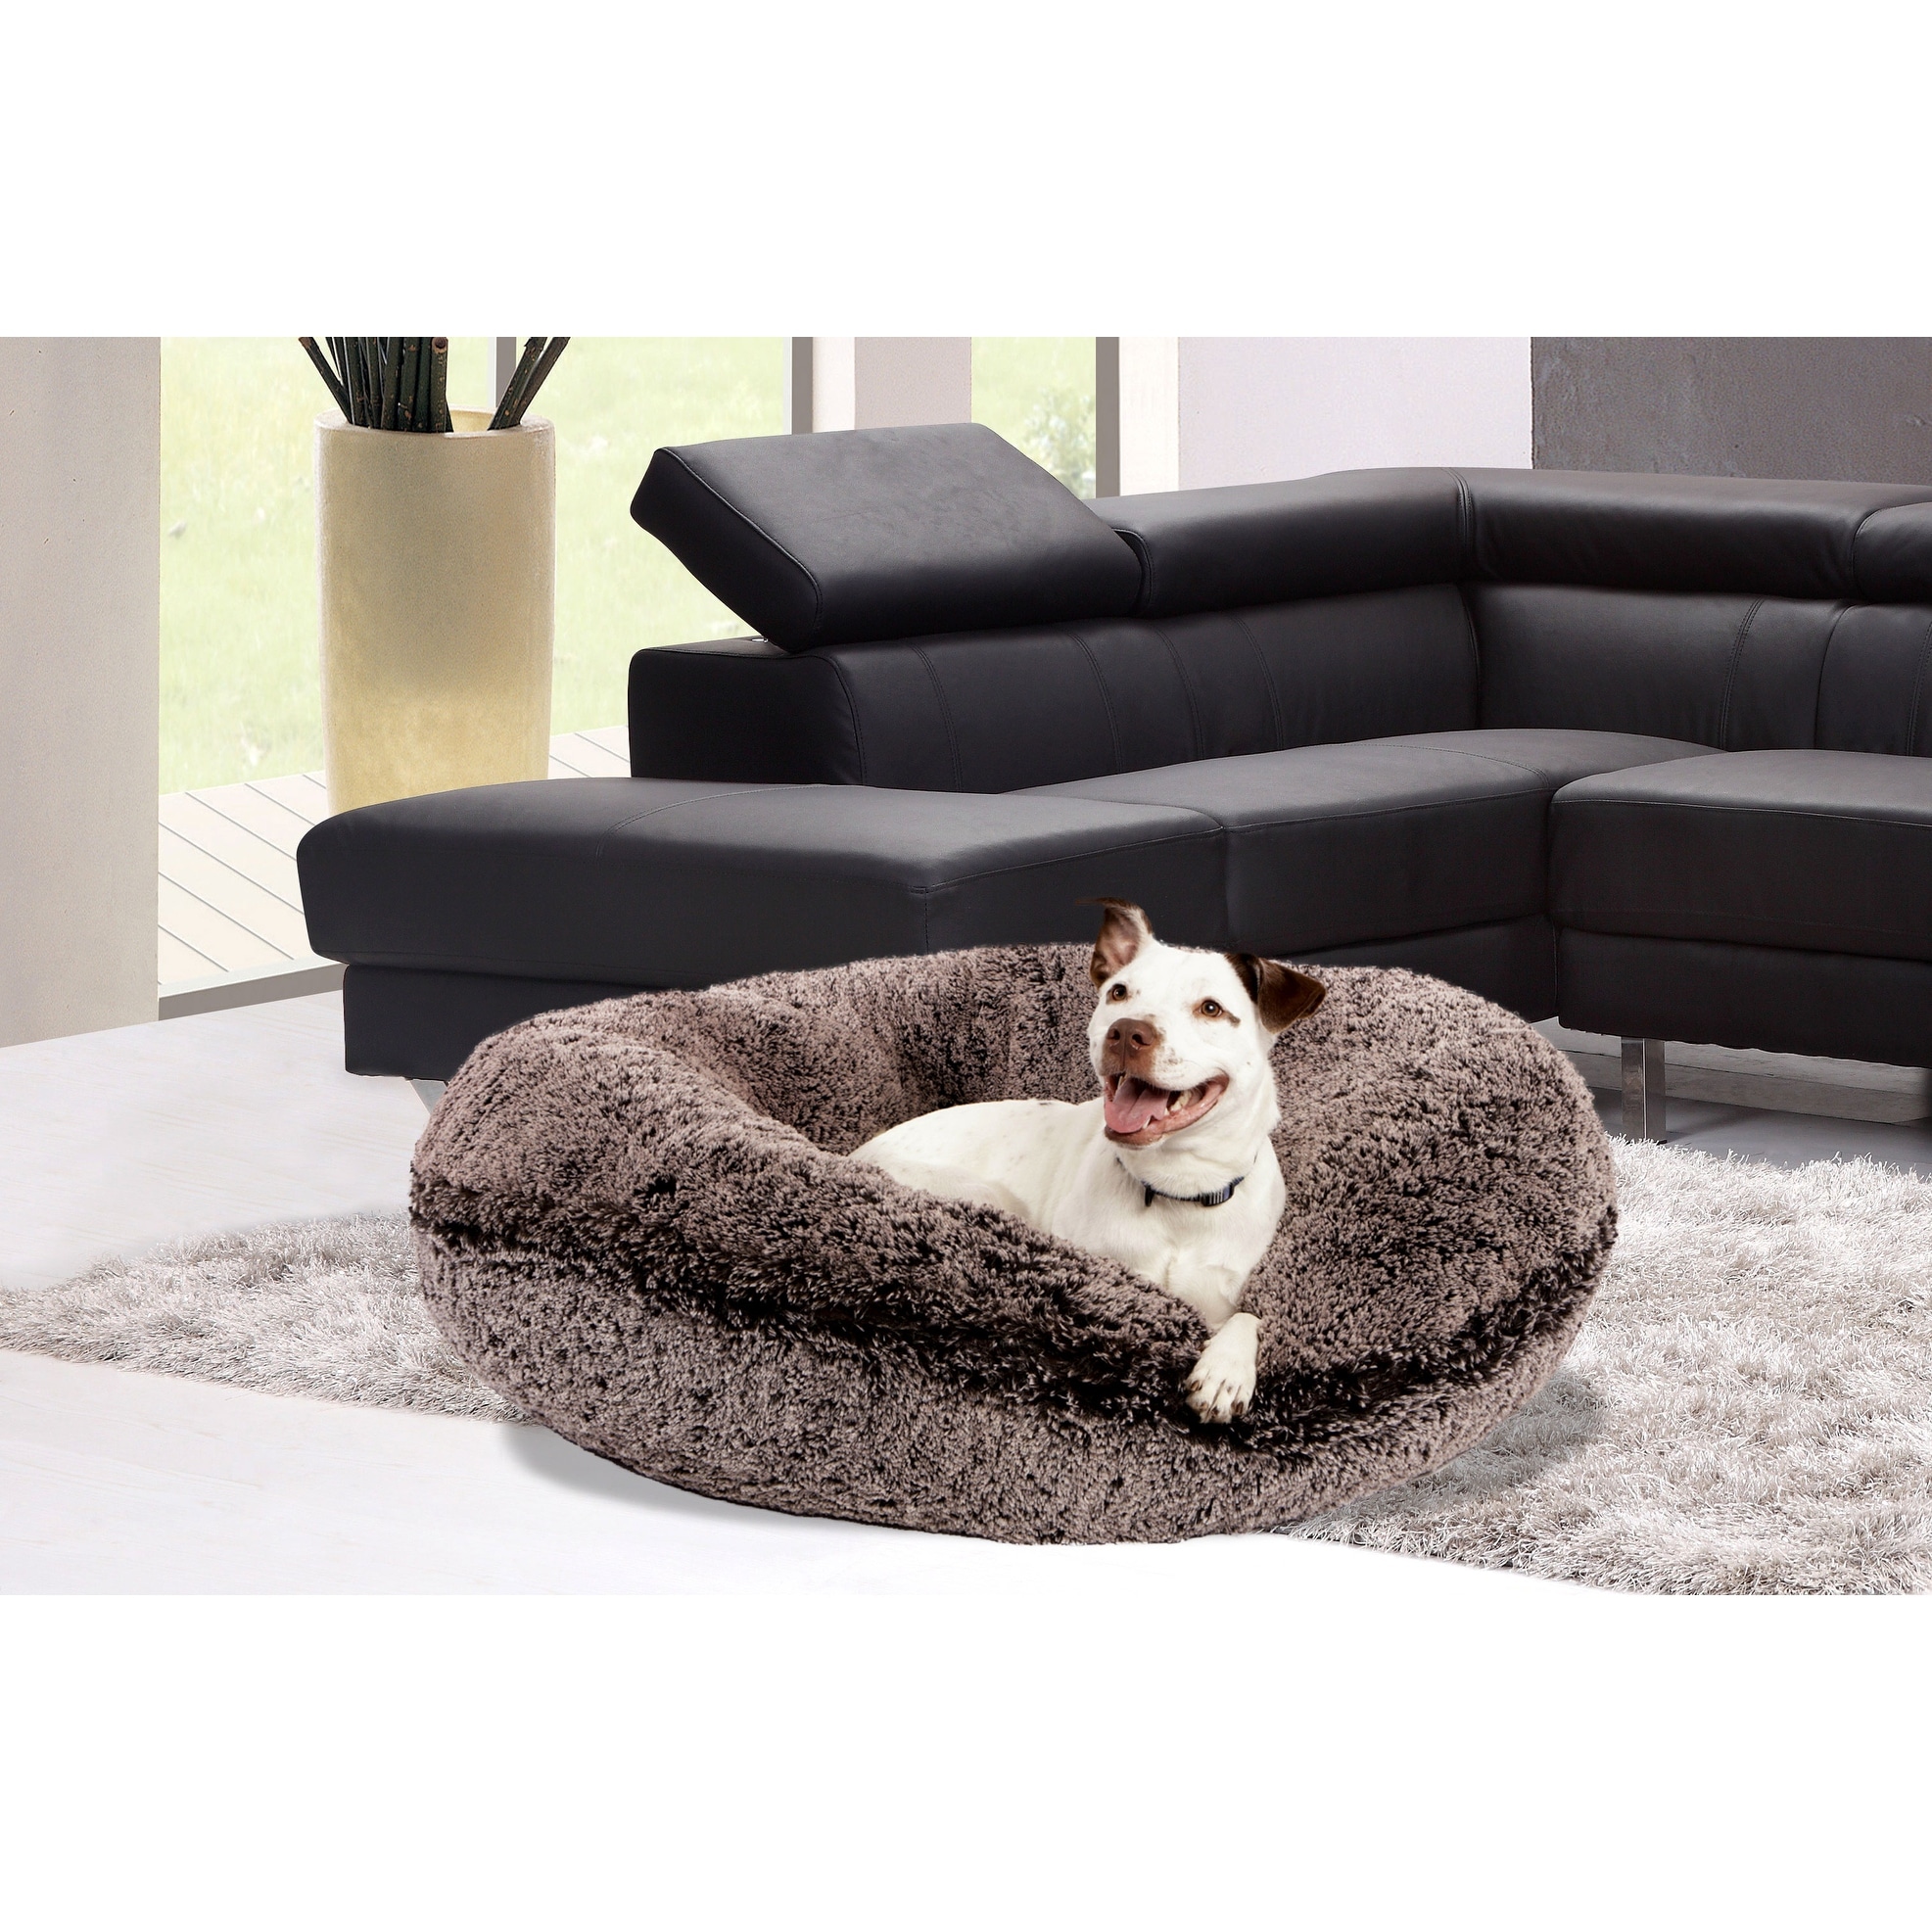 Extra Small Pet Supplies - Bed Bath & Beyond